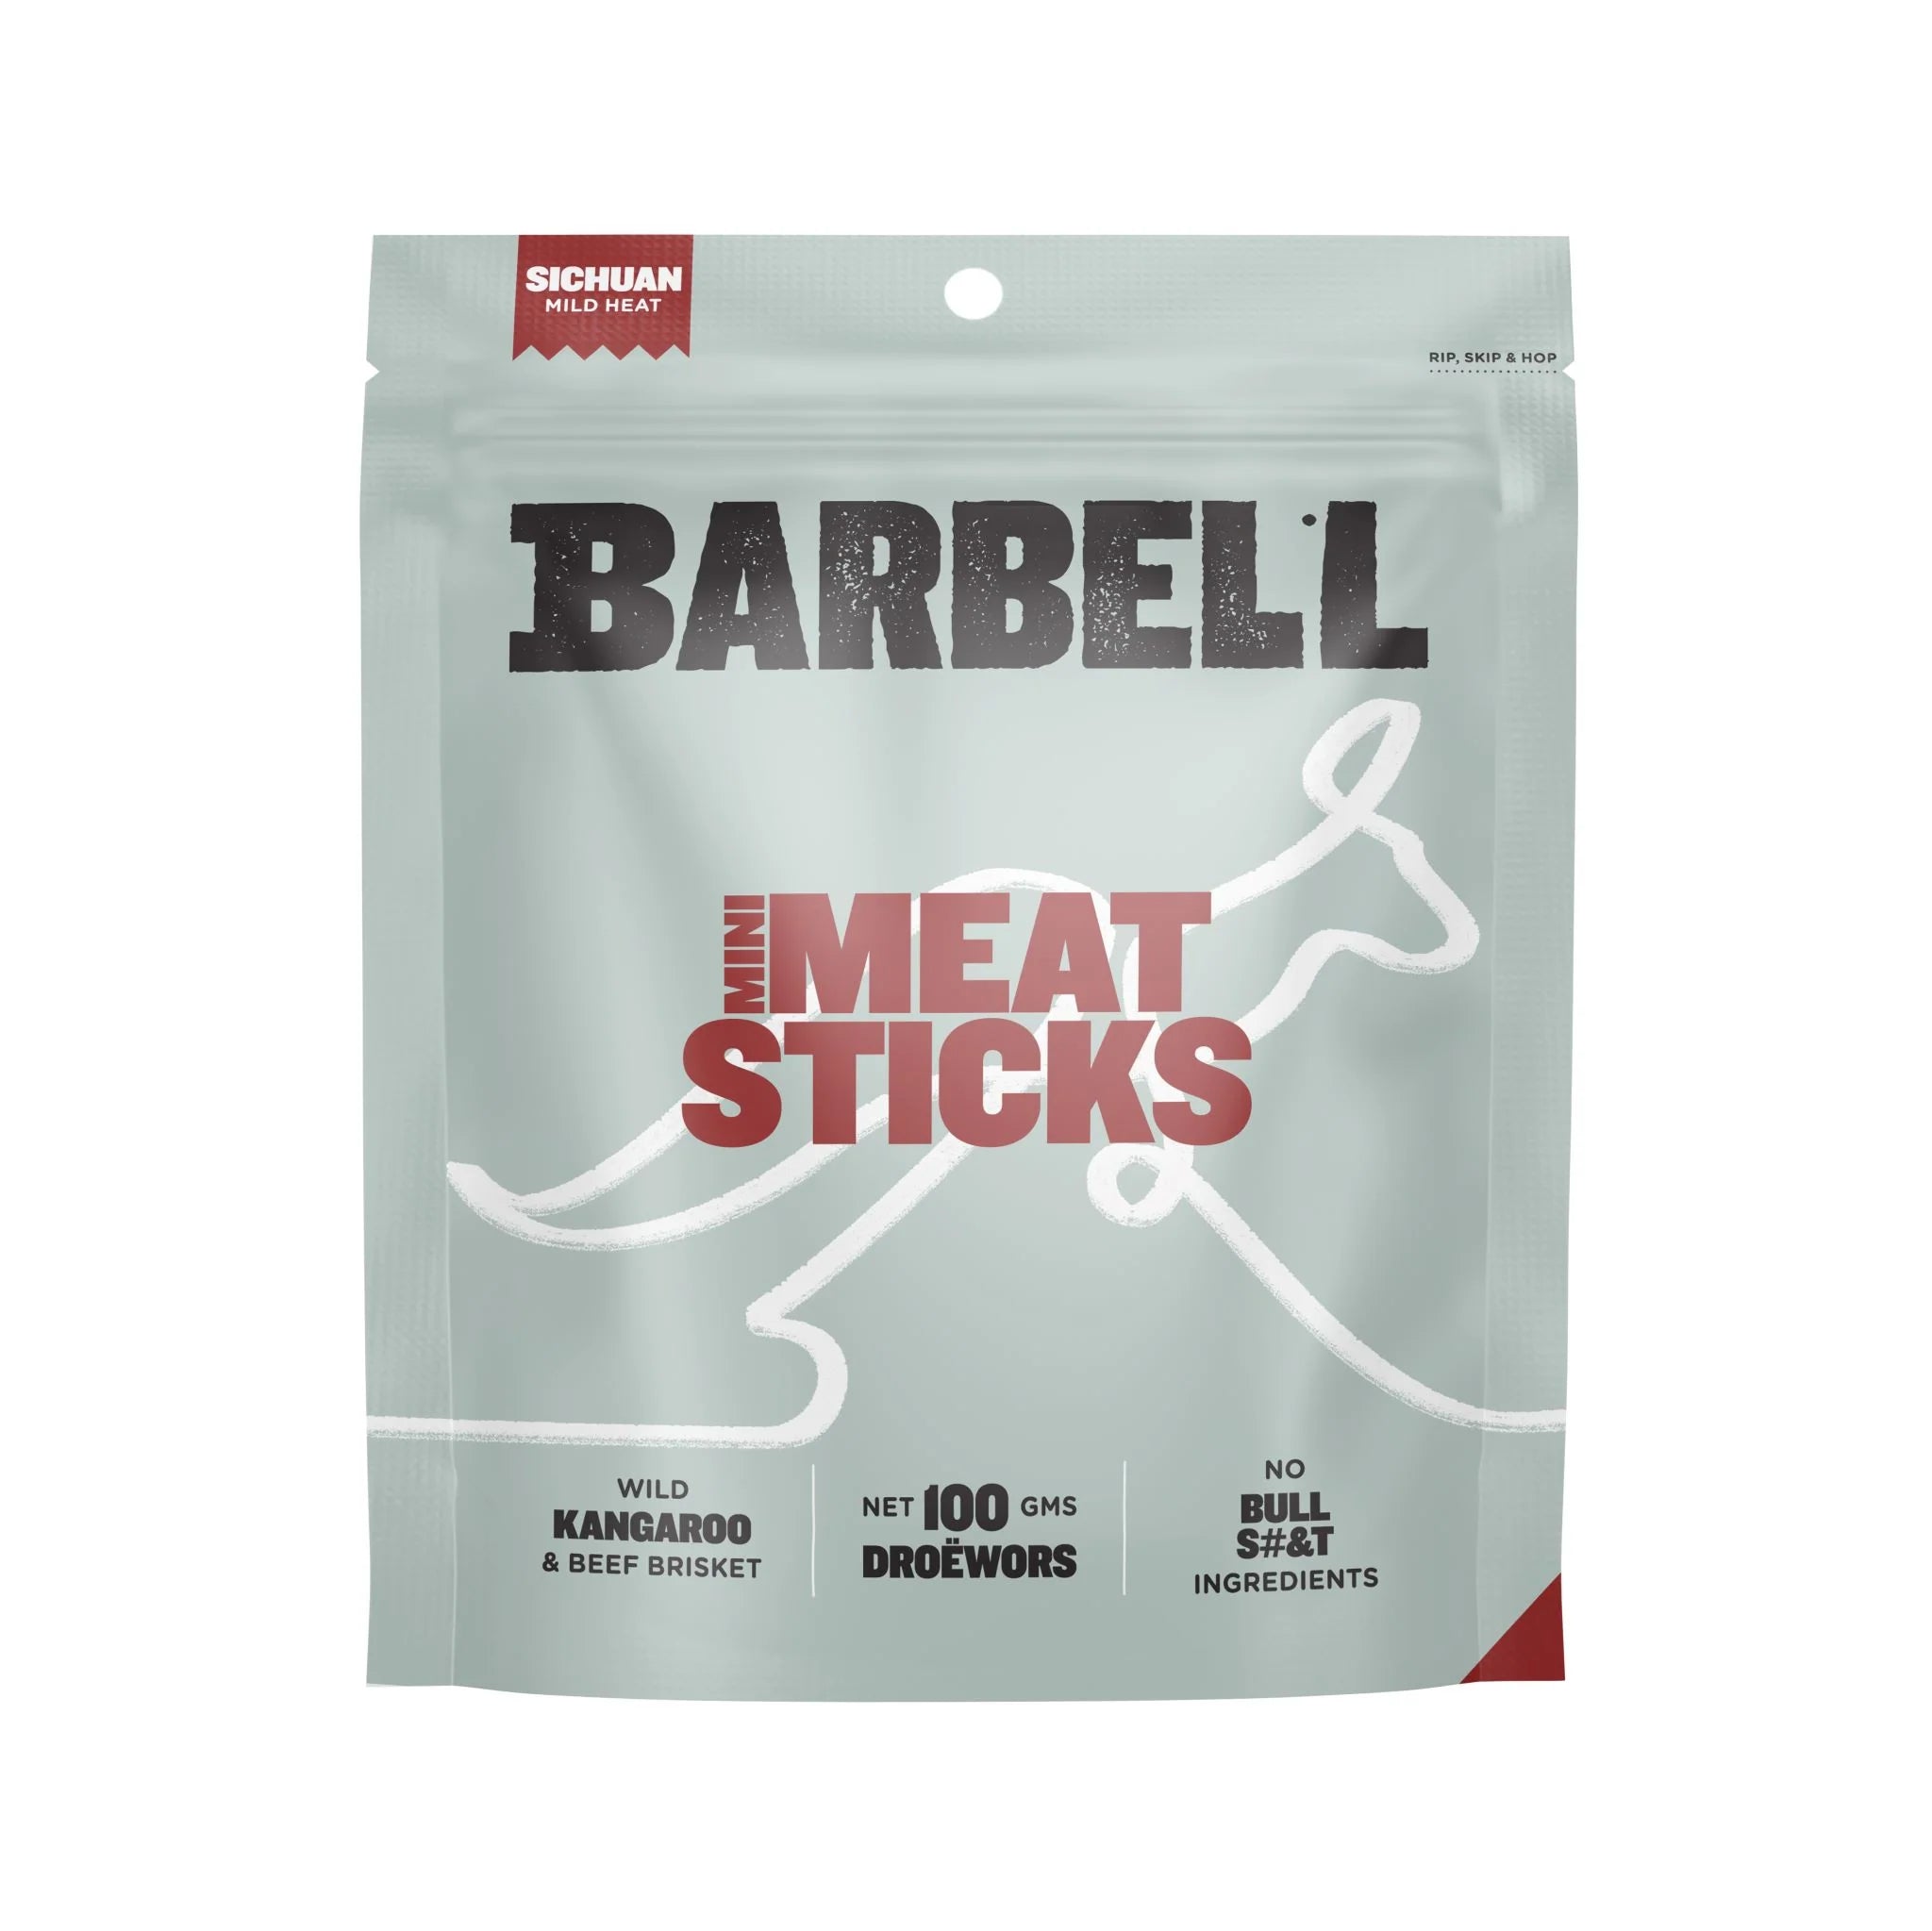 Barbell Meat Sticks - Various Flavours - 100g - SICHUAN - Mansfield Hunting & Fishing - Products to prepare for Corona Virus